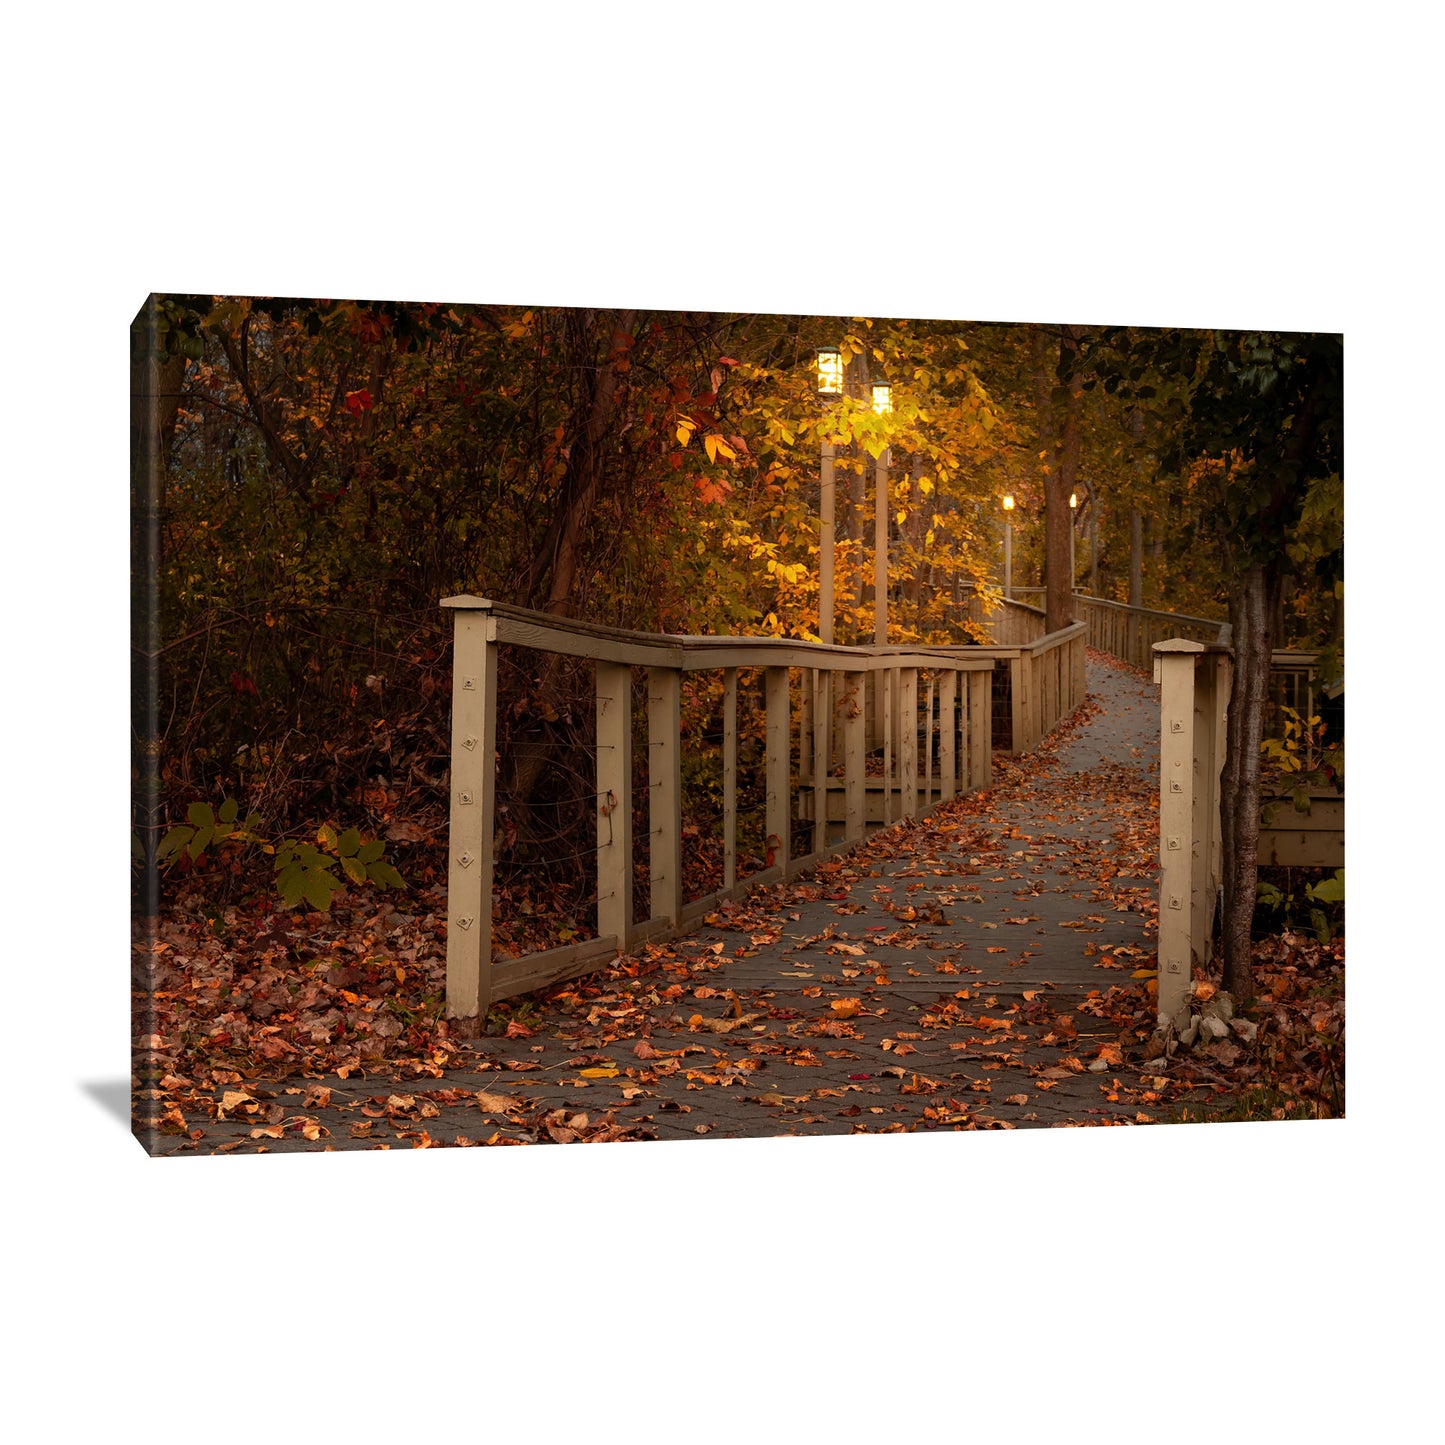 The canvas of Woodlawn Beach Boardwalk presents a morning-lit pathway encircled by autumnal trees, making it a fitting addition to fall-themed wall art for your living space.